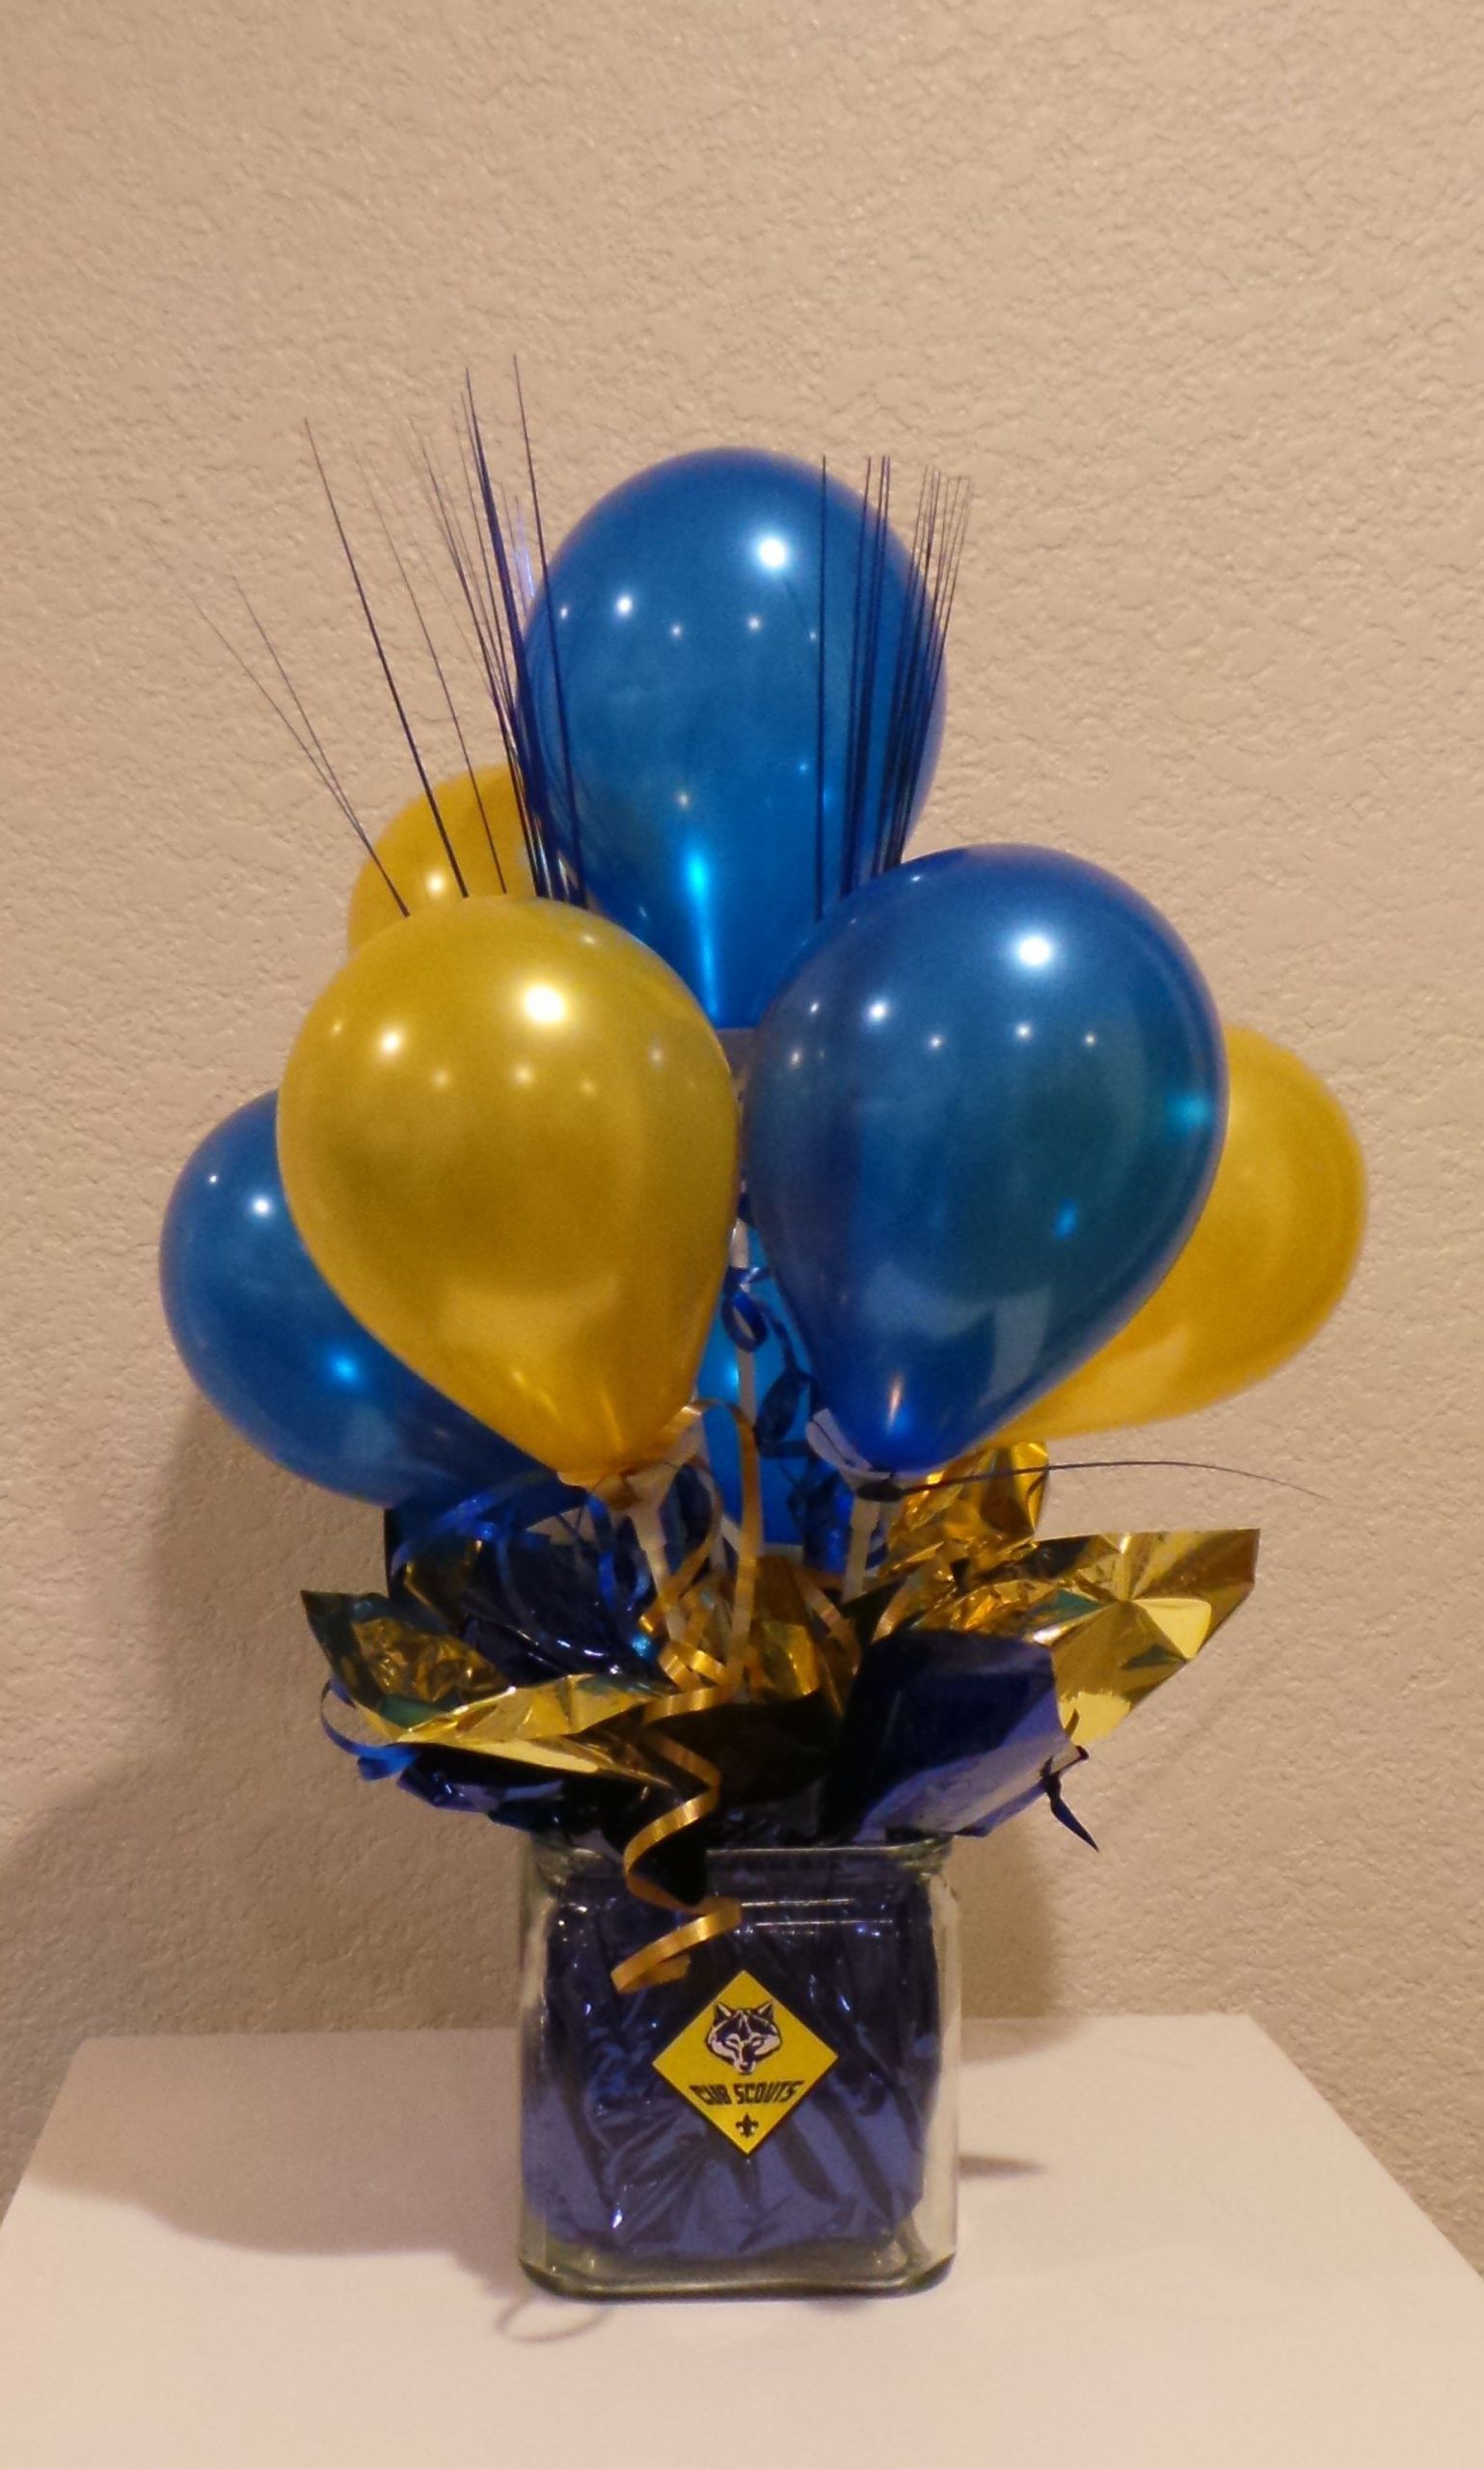 Blue And Gold Graduation Party Ideas
 Pin on cub scouts and boy scouts